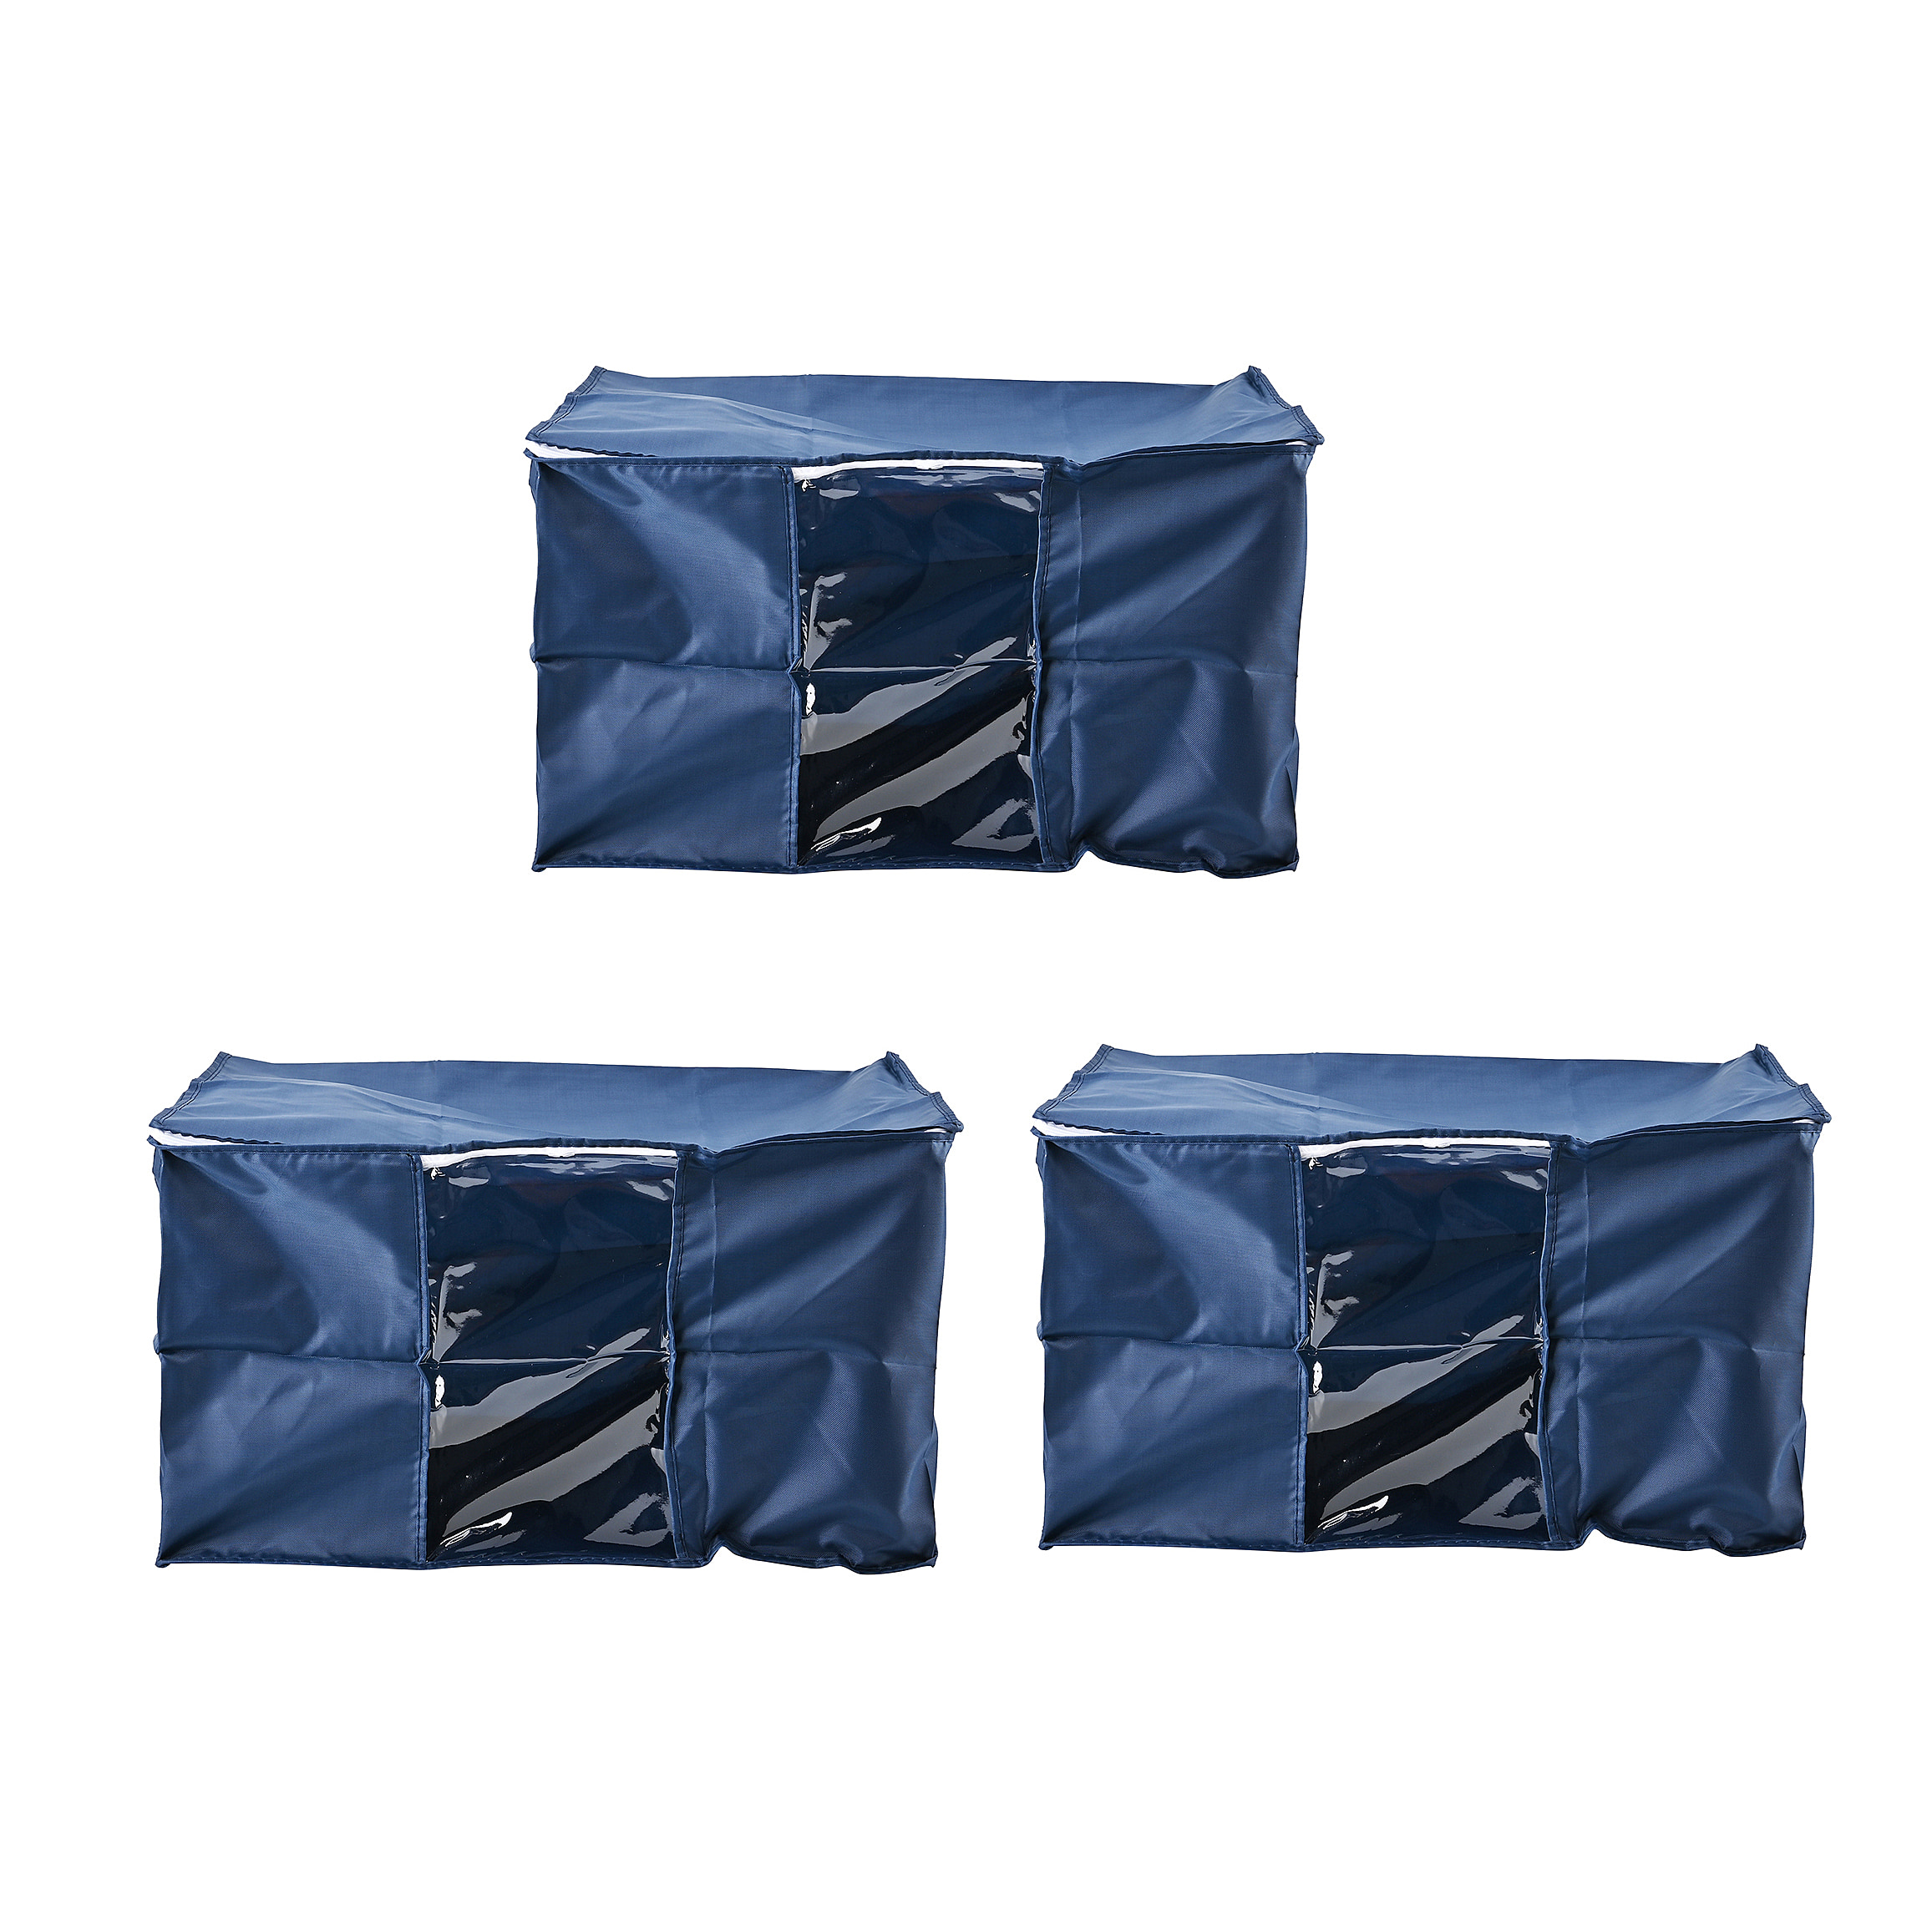 Set-of-3-Homesmart-Stackable-Storage-Bags-Size-60x40x35-cm-Navy